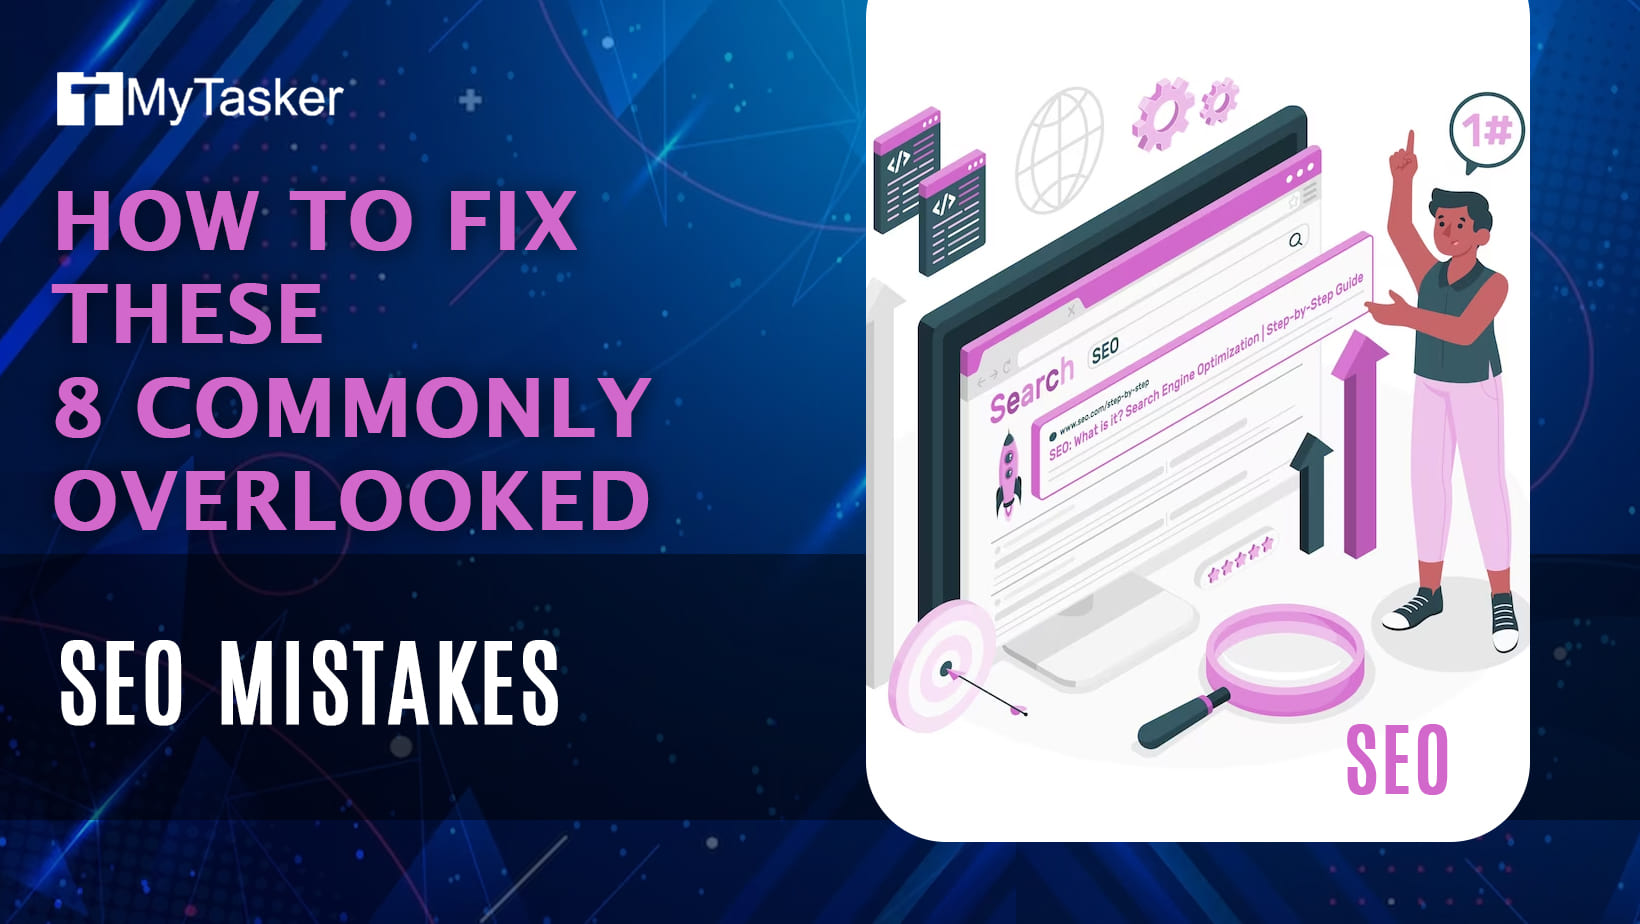 How to Fix These 8 Commonly Overlooked SEO Mistakes